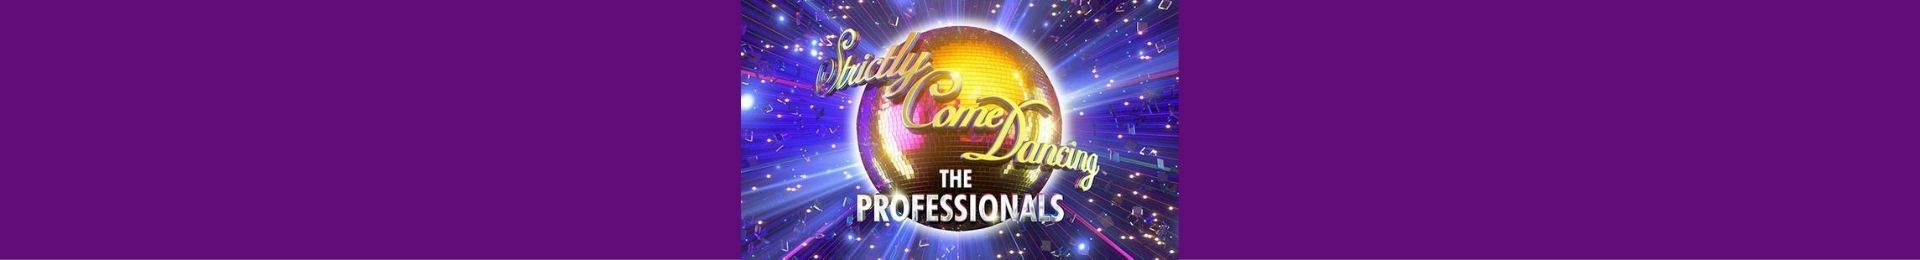 Strictly Come Dancing: The Professionals banner image